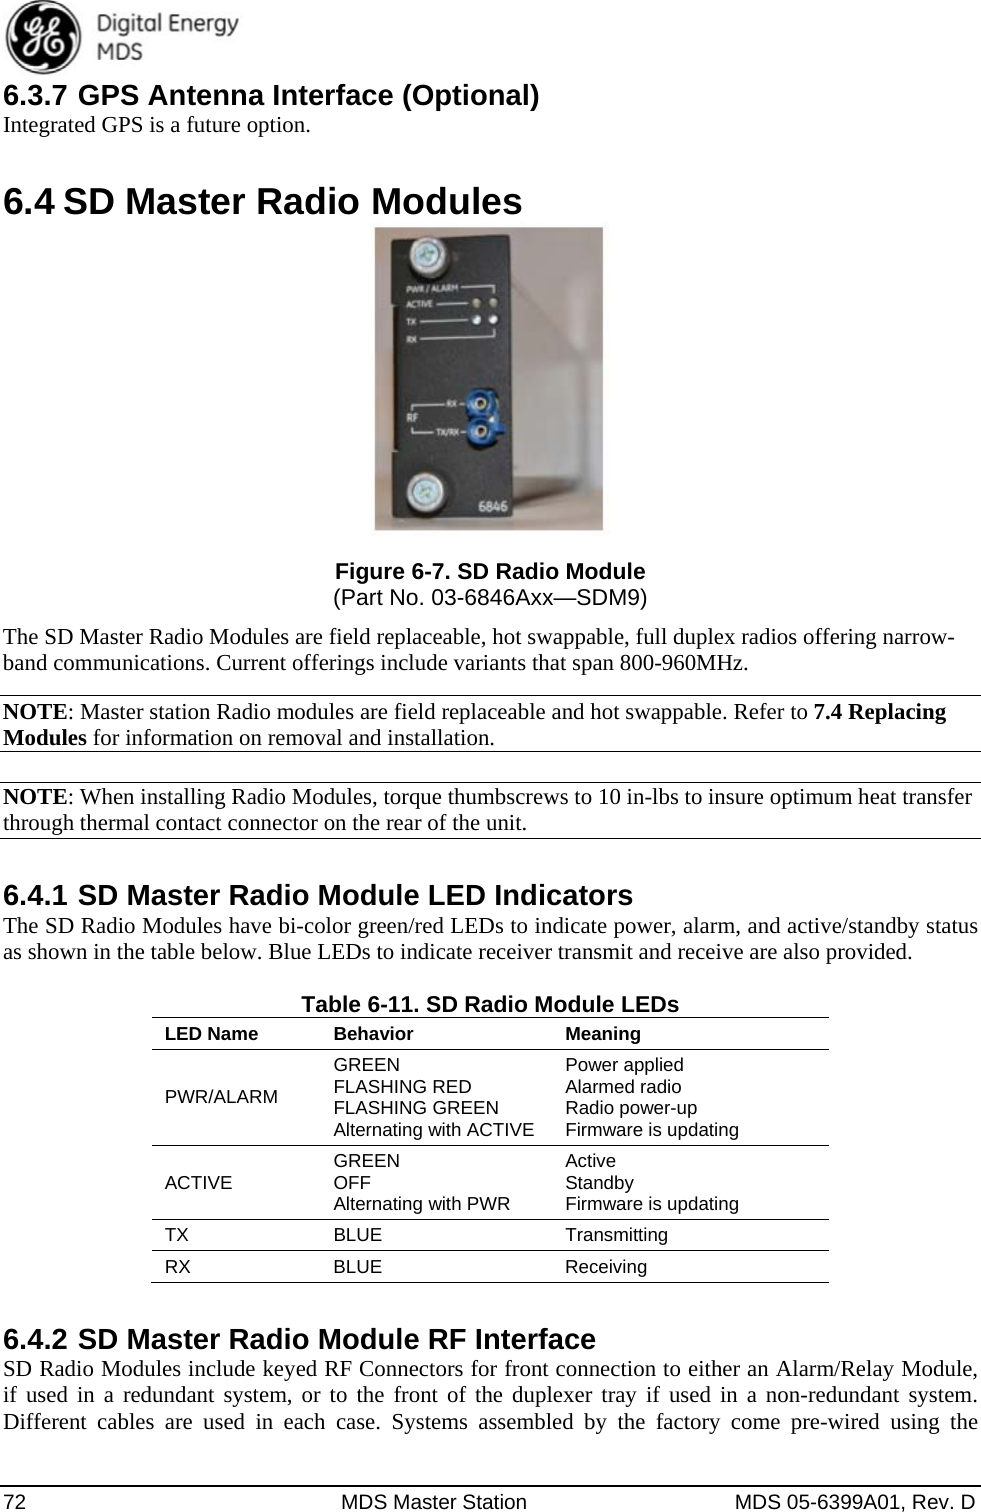  72  MDS Master Station  MDS 05-6399A01, Rev. D 6.3.7 GPS Antenna Interface (Optional) Integrated GPS is a future option. 6.4 SD Master Radio Modules  Figure 6-7. SD Radio Module (Part No. 03-6846Axx—SDM9) The SD Master Radio Modules are field replaceable, hot swappable, full duplex radios offering narrow-band communications. Current offerings include variants that span 800-960MHz. NOTE: Master station Radio modules are field replaceable and hot swappable. Refer to 7.4 Replacing Modules for information on removal and installation.  NOTE: When installing Radio Modules, torque thumbscrews to 10 in-lbs to insure optimum heat transfer through thermal contact connector on the rear of the unit. 6.4.1 SD Master Radio Module LED Indicators The SD Radio Modules have bi-color green/red LEDs to indicate power, alarm, and active/standby status as shown in the table below. Blue LEDs to indicate receiver transmit and receive are also provided.  Table 6-11. SD Radio Module LEDs LED Name  BehaviorMeaningPWR/ALARM GREEN  FLASHING RED FLASHING GREEN Alternating with ACTIVE Power applied Alarmed radio Radio power-up Firmware is updating ACTIVE  GREEN  OFF Alternating with PWR Active Standby Firmware is updating TX BLUE  Transmitting RX BLUE  Receiving 6.4.2 SD Master Radio Module RF Interface SD Radio Modules include keyed RF Connectors for front connection to either an Alarm/Relay Module, if used in a redundant system, or to the front of the duplexer tray if used in a non-redundant system. Different cables are used in each case. Systems assembled by the factory come pre-wired using the 